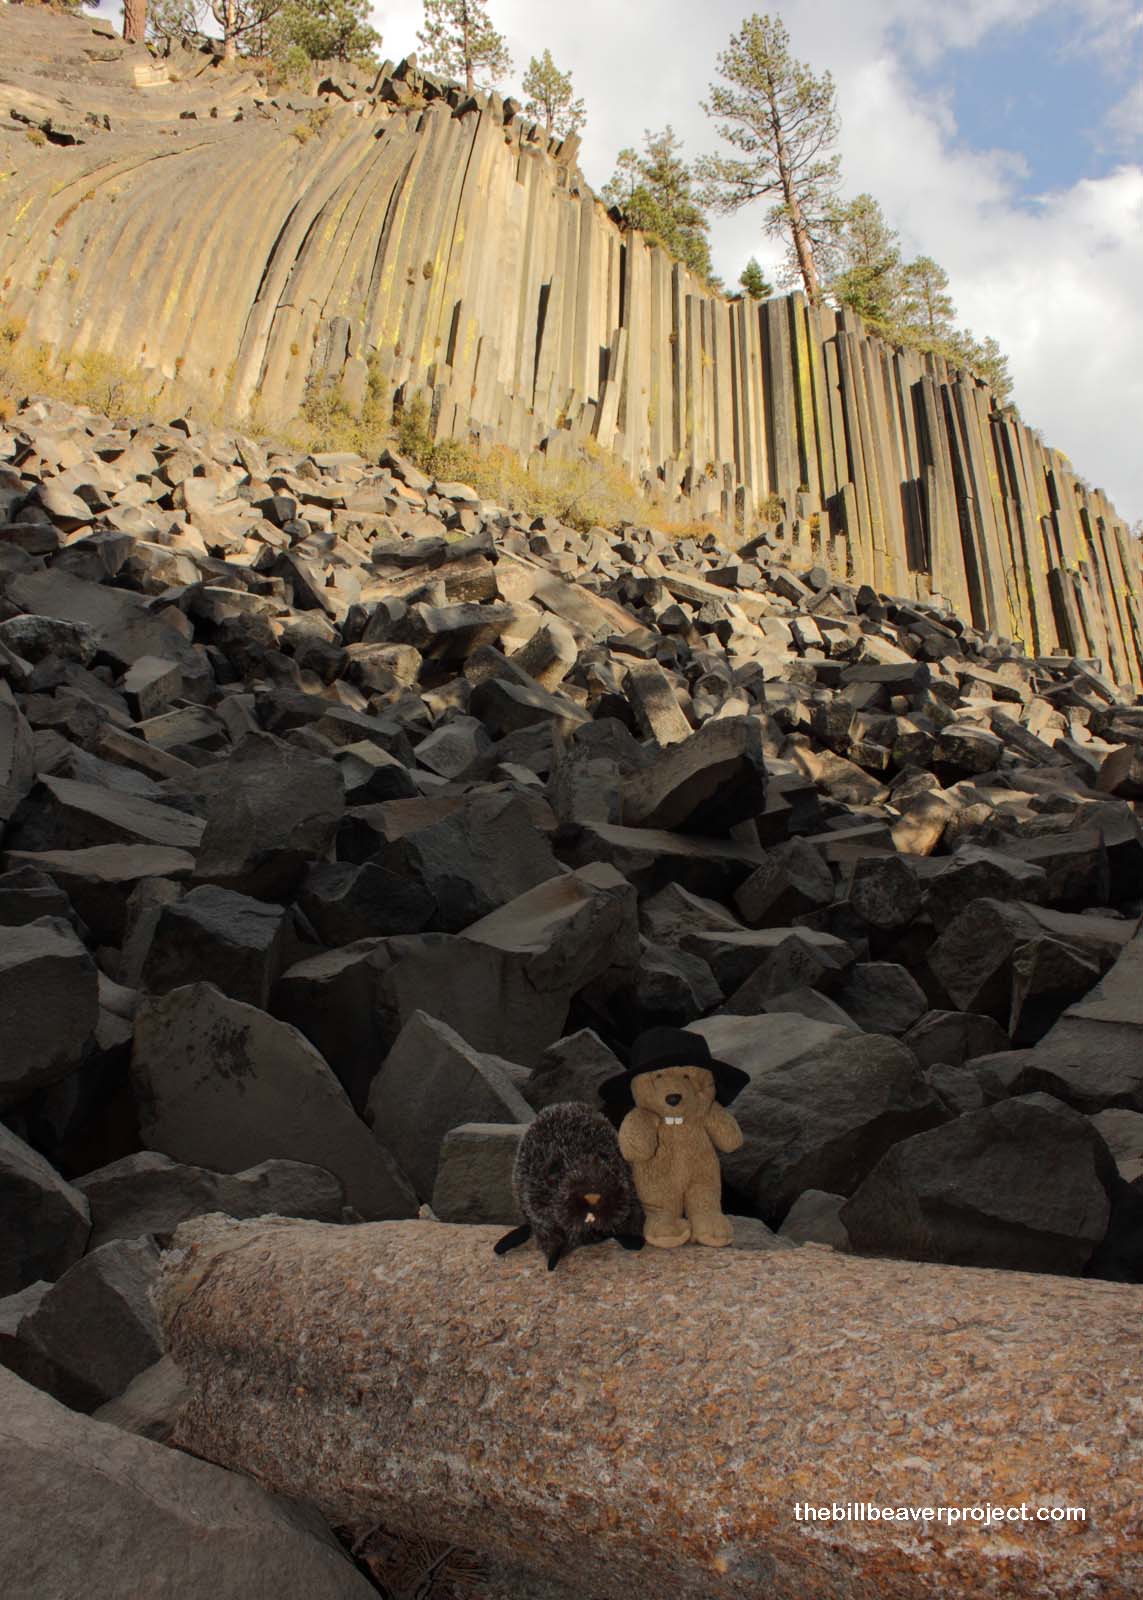 Evening light upon the postpile!